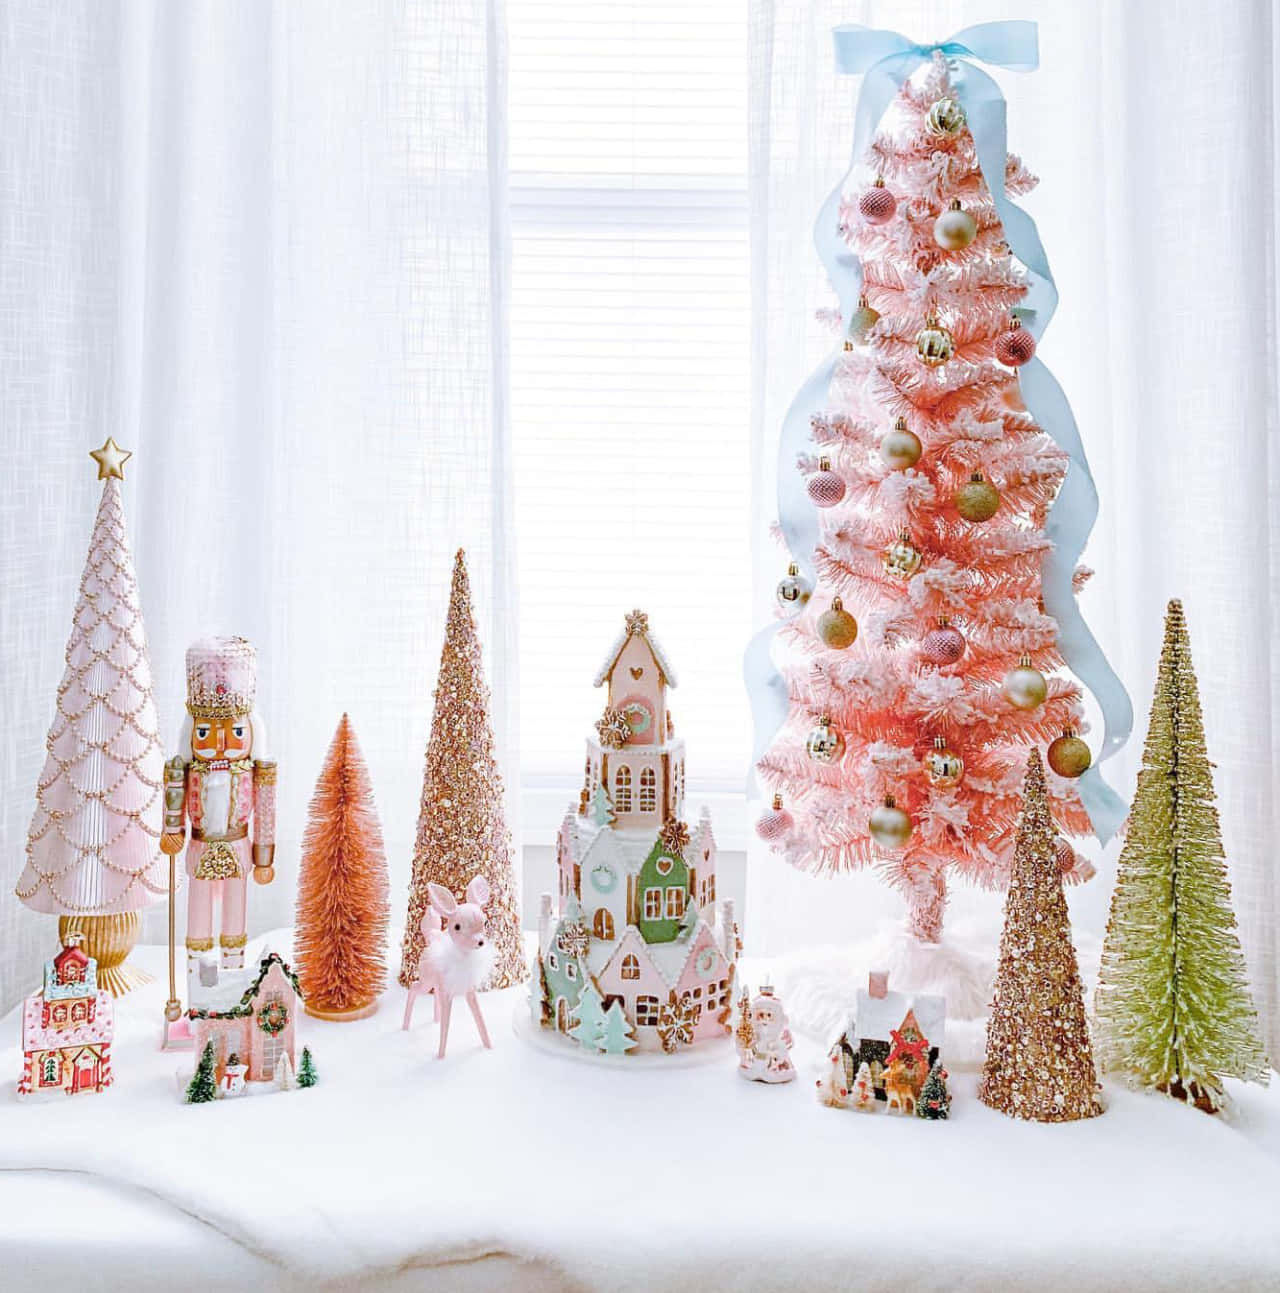 Cute Pastel Aesthetic Christmas Tree Collection Wallpaper